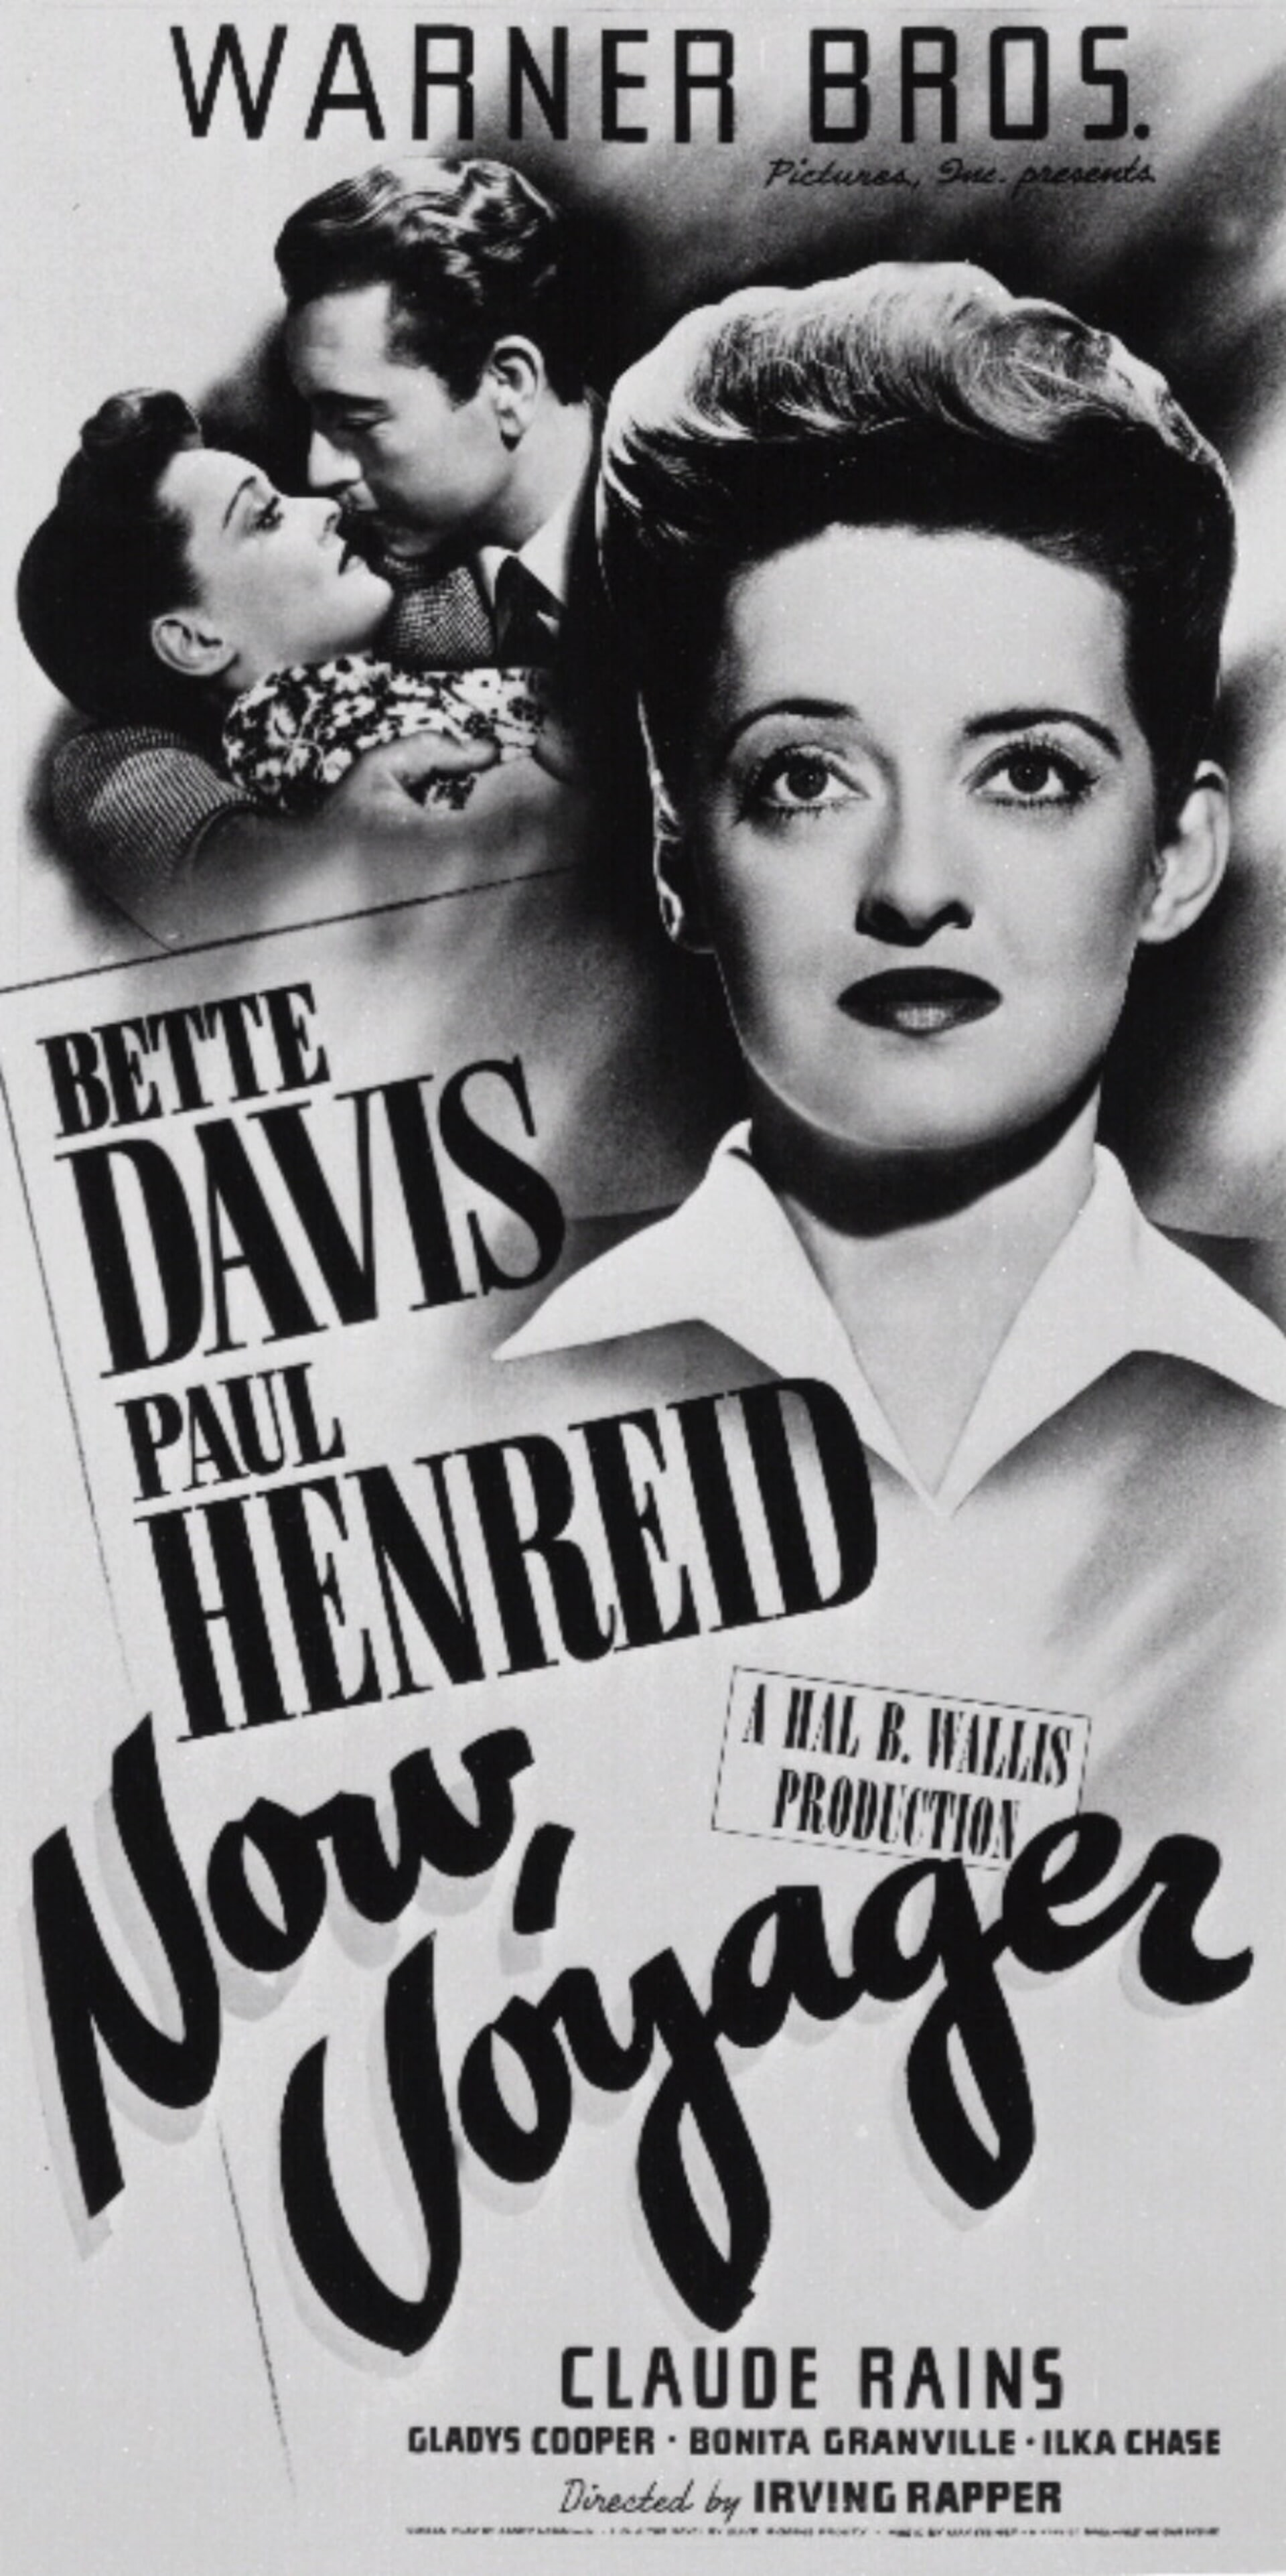 the now voyager movie